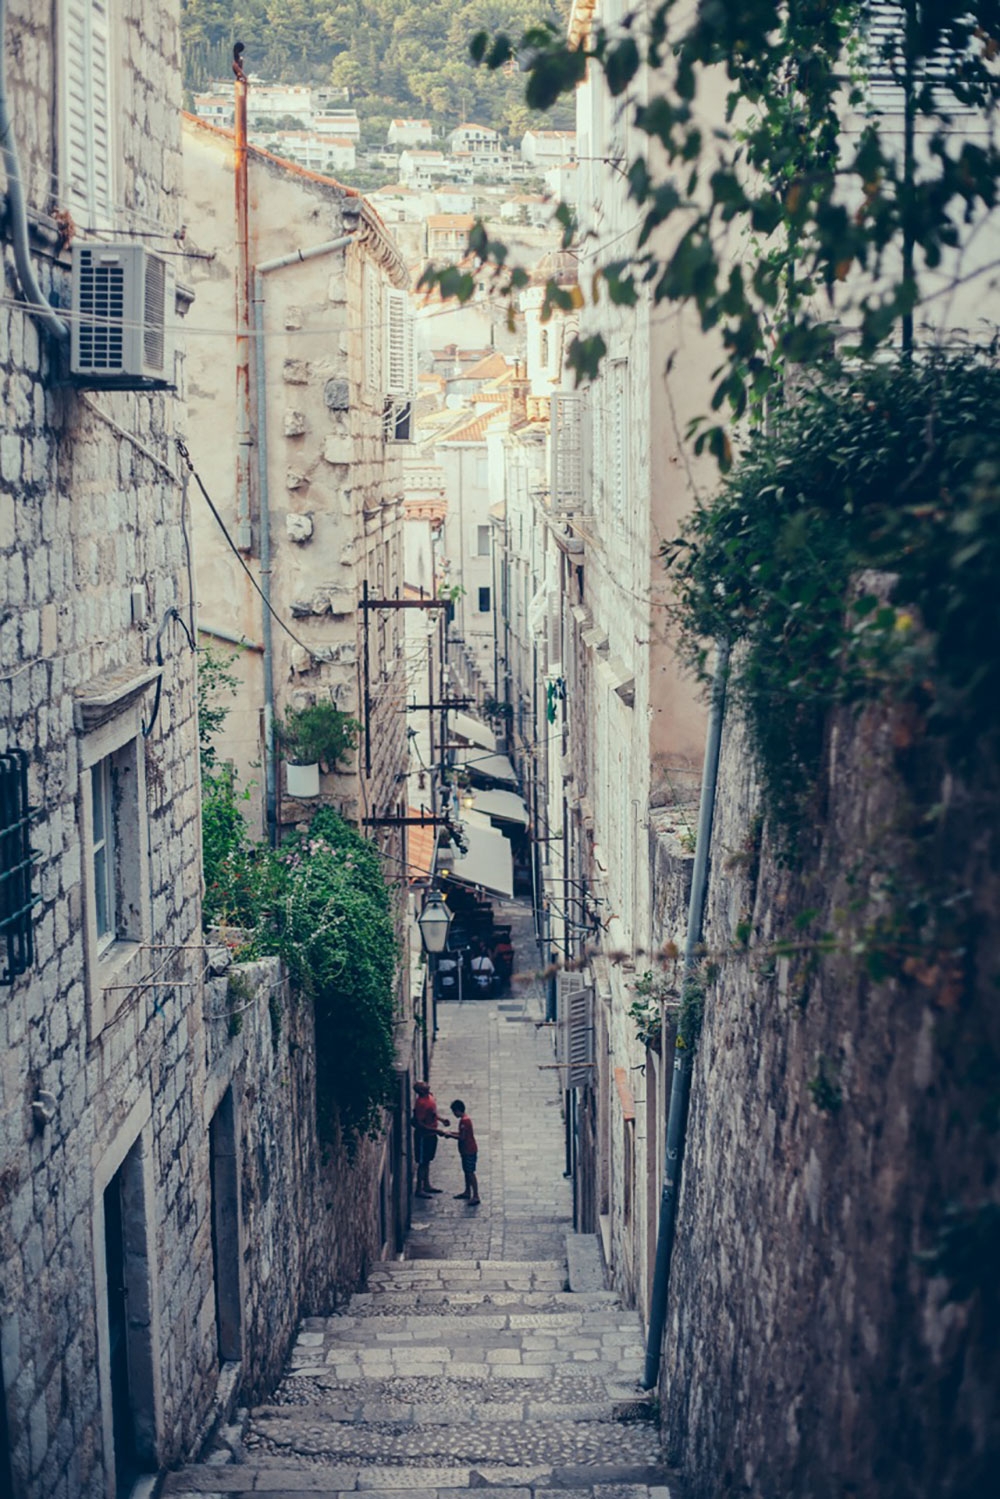 Exploring the stone streets of Dubrovnik 